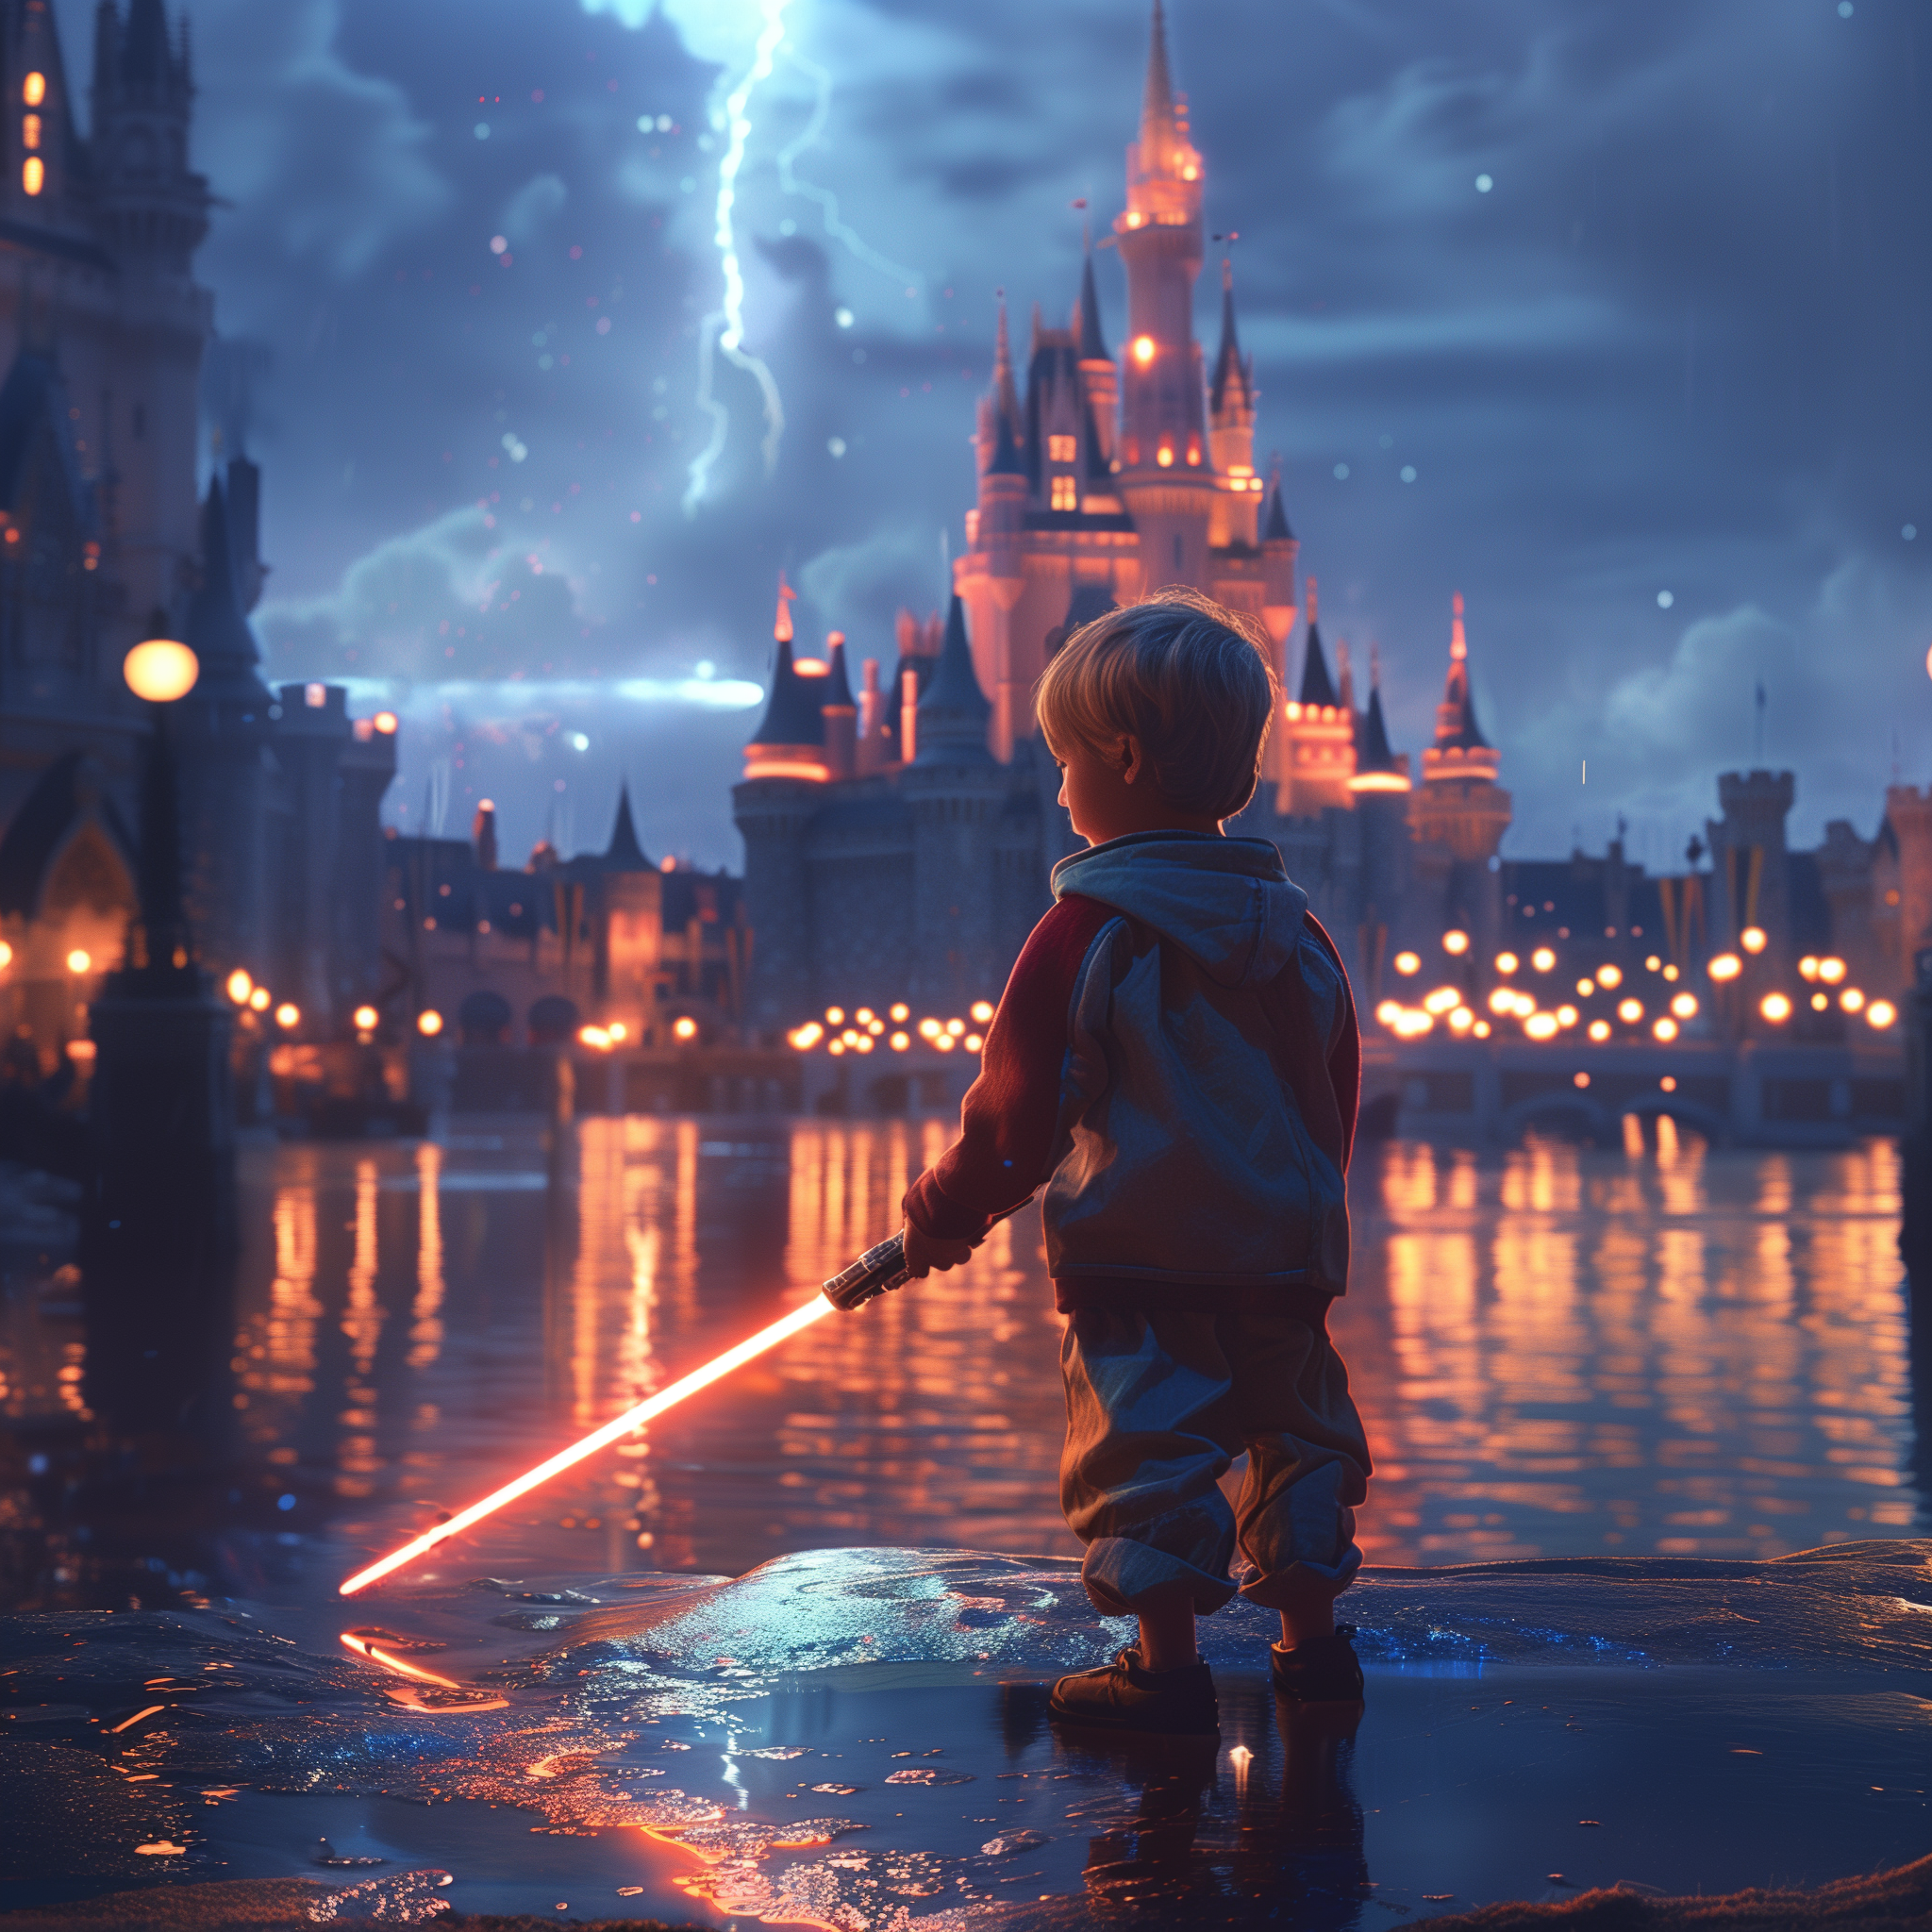 how much is a lightsaber at Magic Kingdom world?